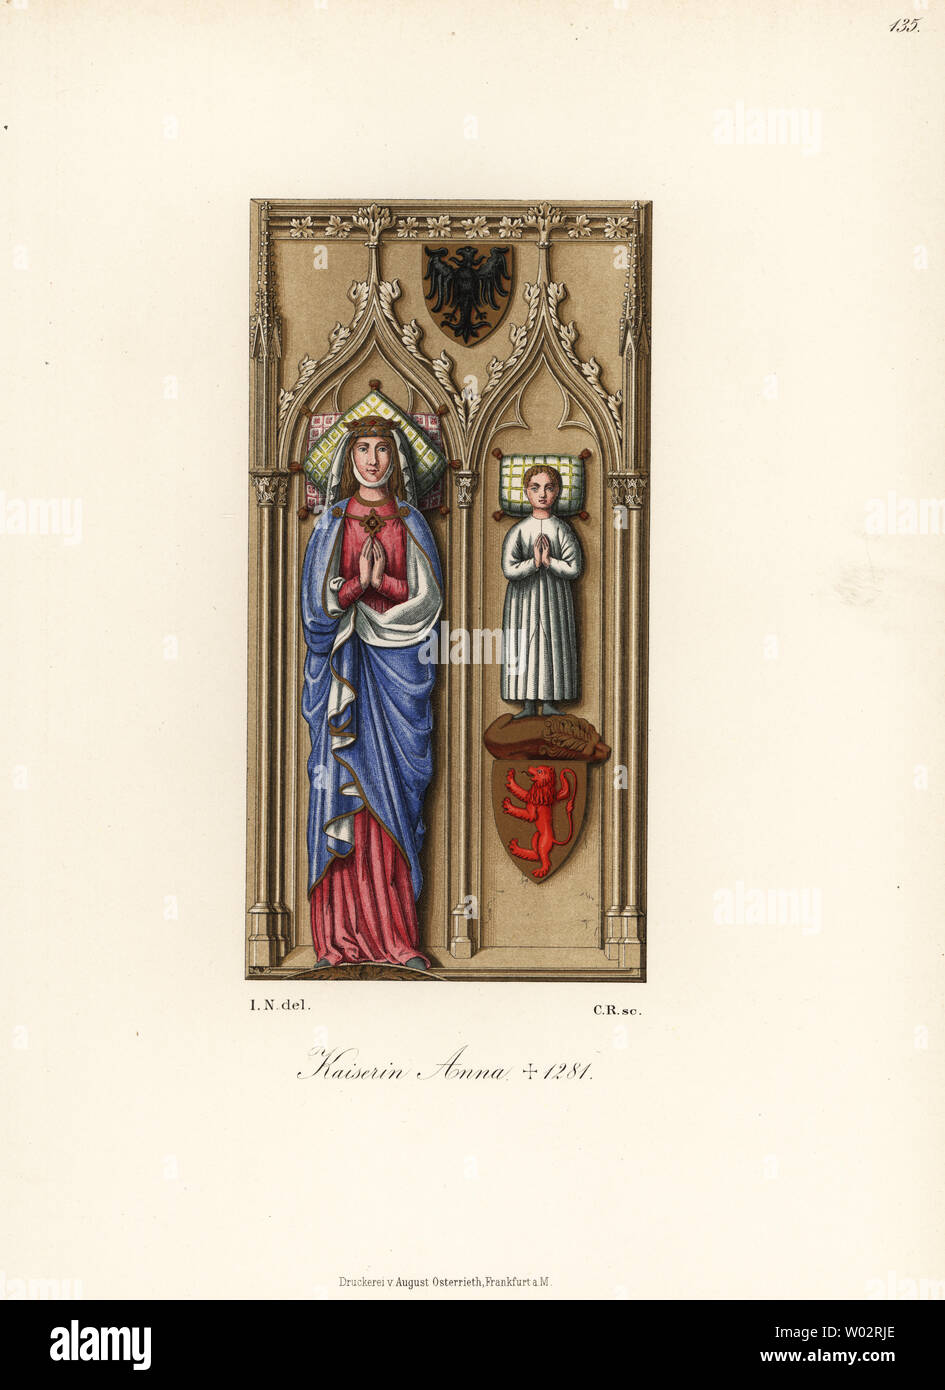 Gertrude Anne of Hohenberg, 1225-1281, queen of King Rudolf I of Germany, and her son Charles, d.1276. Kaiserin Anna Gertraud, Karl. From her tomb in Basel Minster. Chromolithograph from Hefner-Alteneck's Costumes, Artworks and Appliances from the Middle Ages to the 17th Century, Frankfurt, 1889. Illustration by Dr. Jakob Heinrich von Hefner-Alteneck, lithographed by C.R. Dr. Hefner-Alteneck (1811 - 1903) was a German museum curator, archaeologist, art historian, illustrator and etcher. Stock Photo